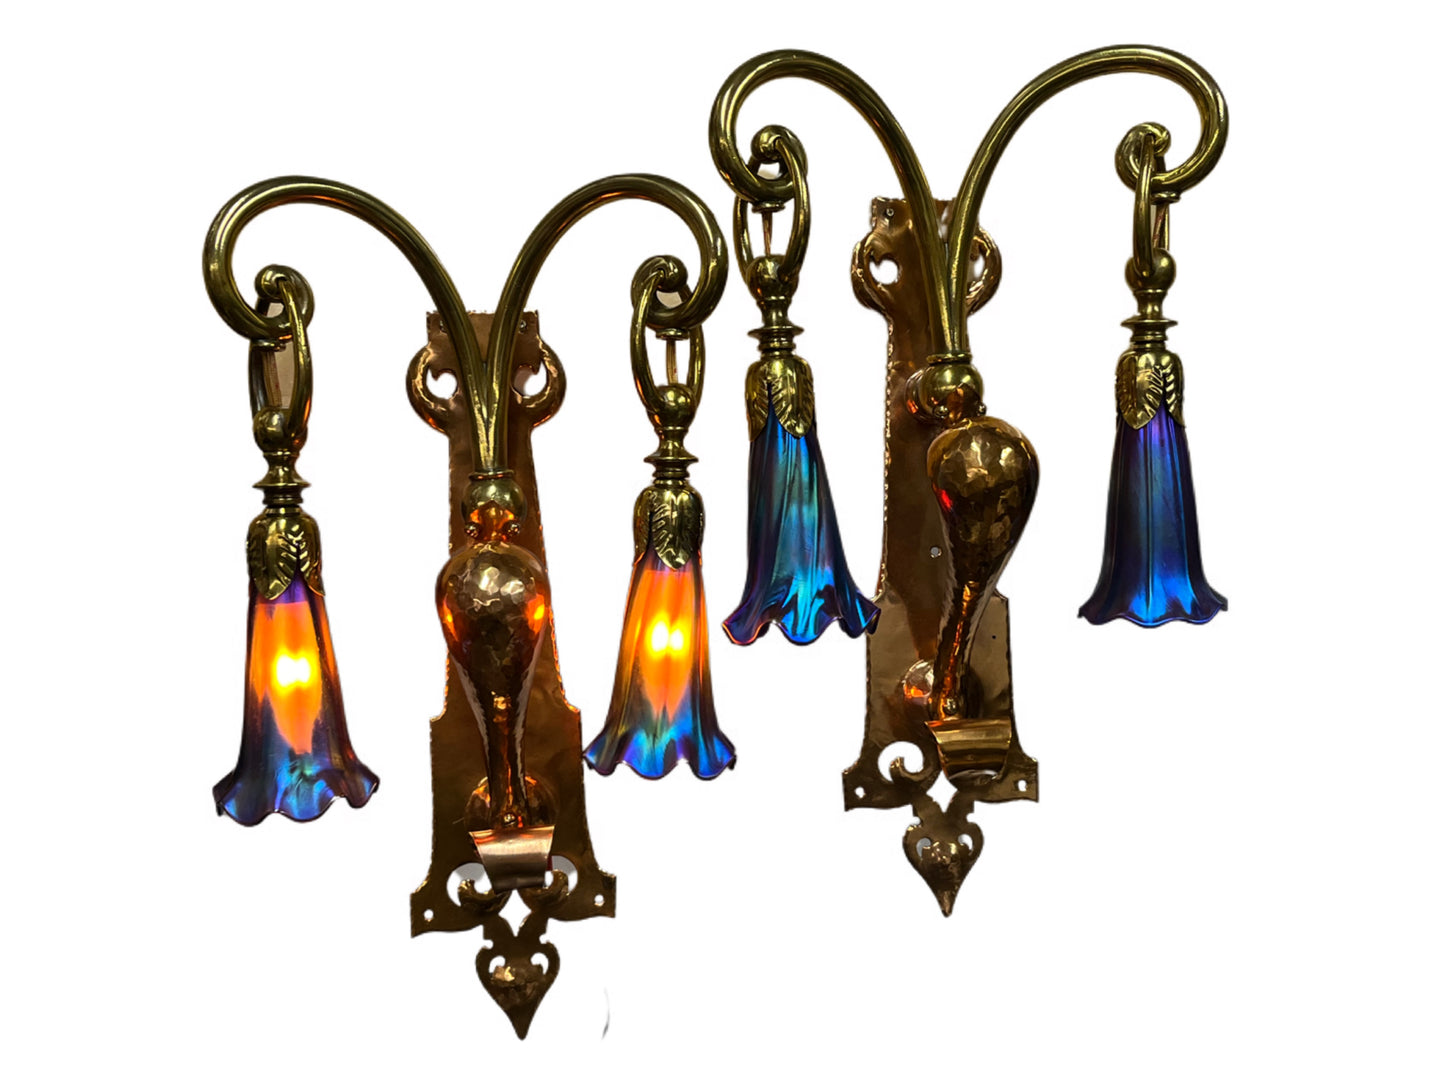 Handmade Arts and Crafts Brass and Copper Art Nouveau Wall Sconces in style of WAS Benson #2059